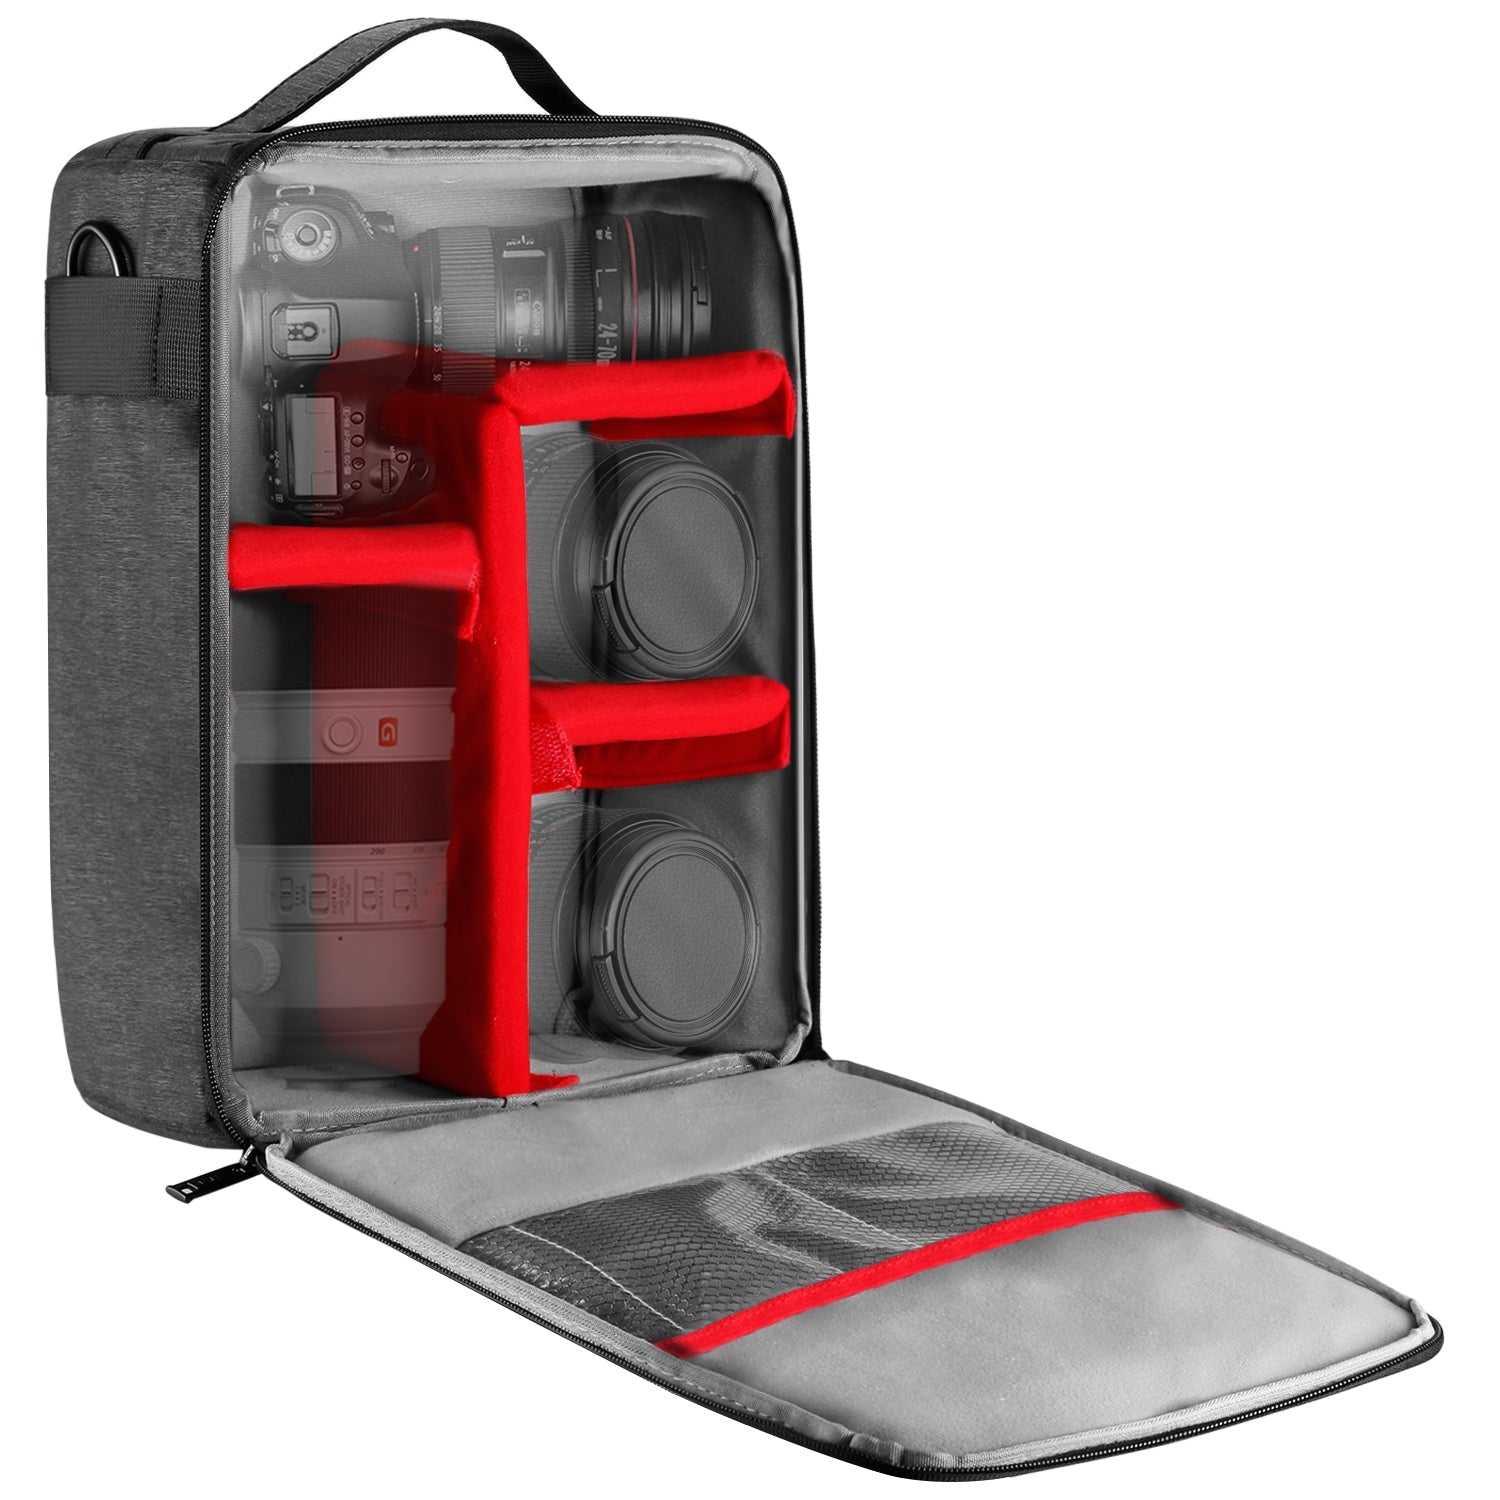 Neewer NW140S Waterproof Camera and Lens Storage Carrying Case